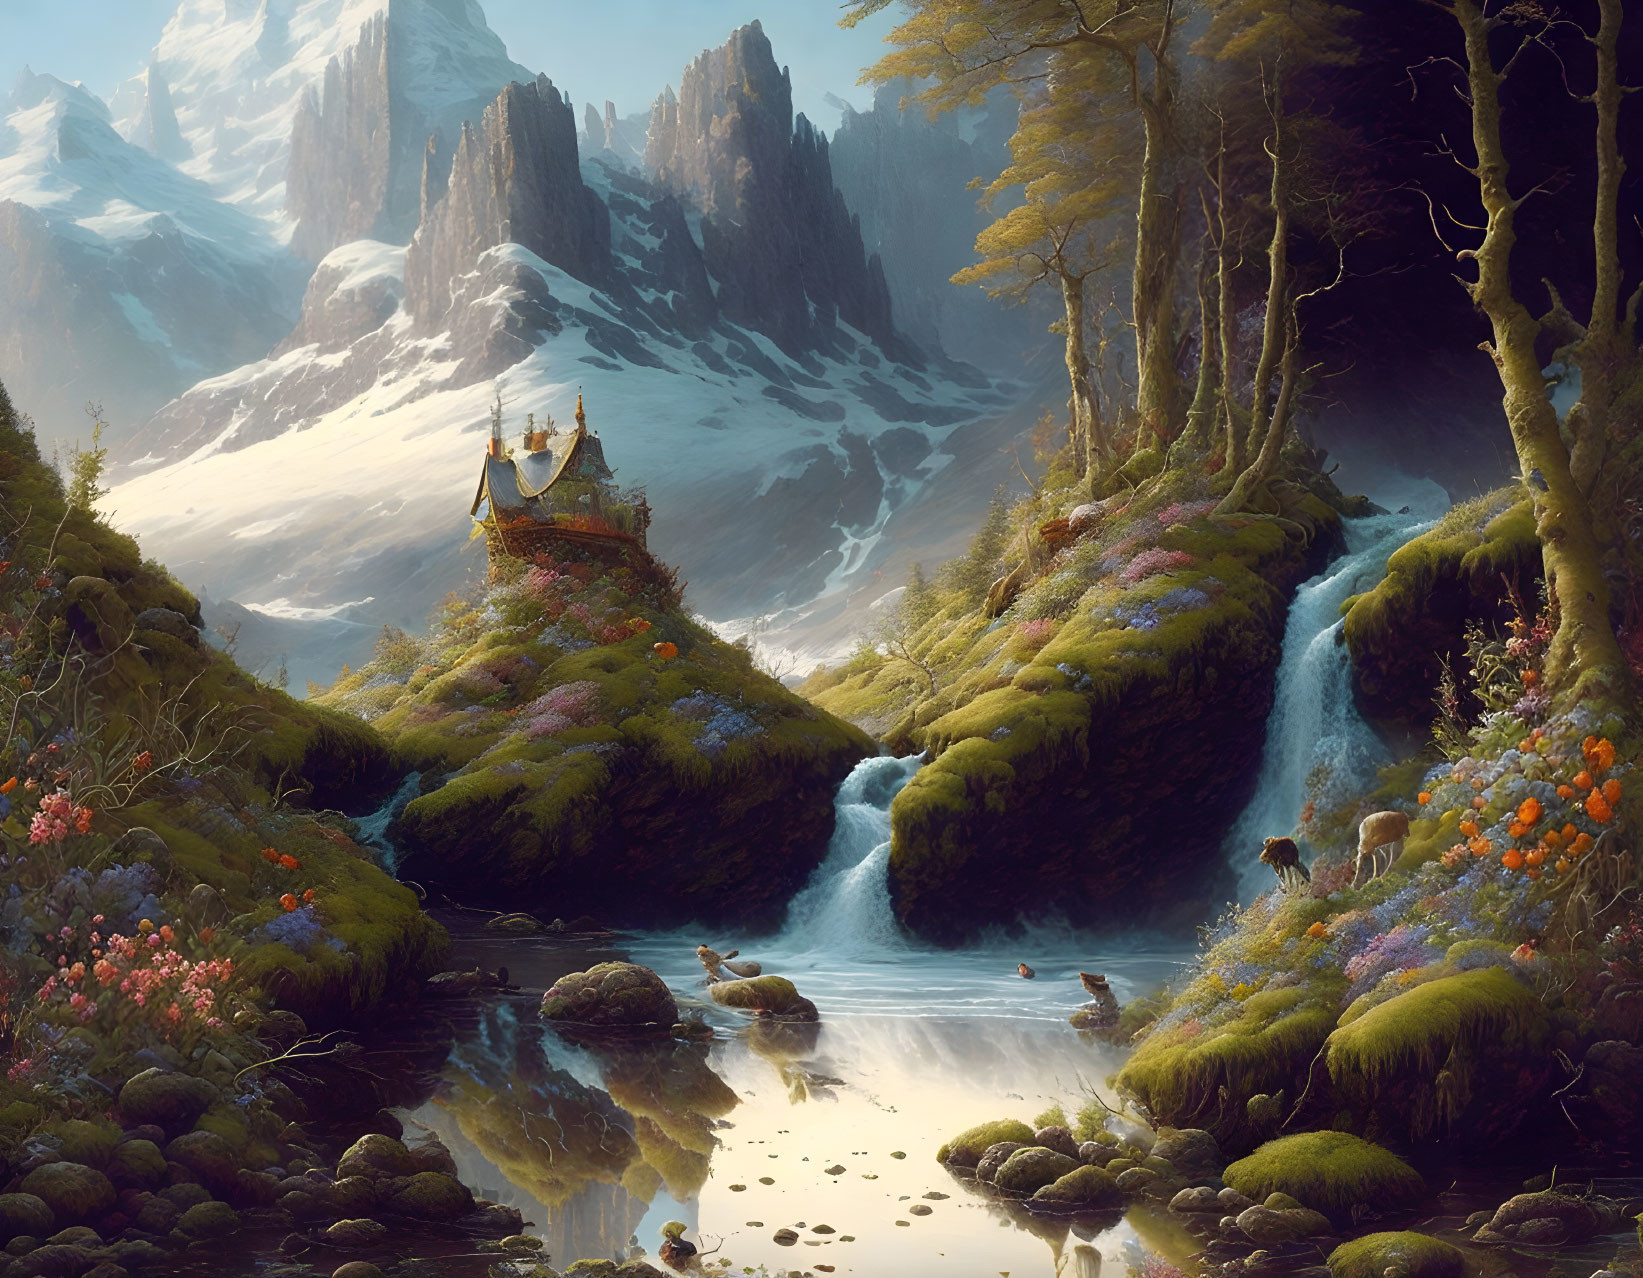 Tranquil landscape with castle, waterfalls, stream, trees, and mountains